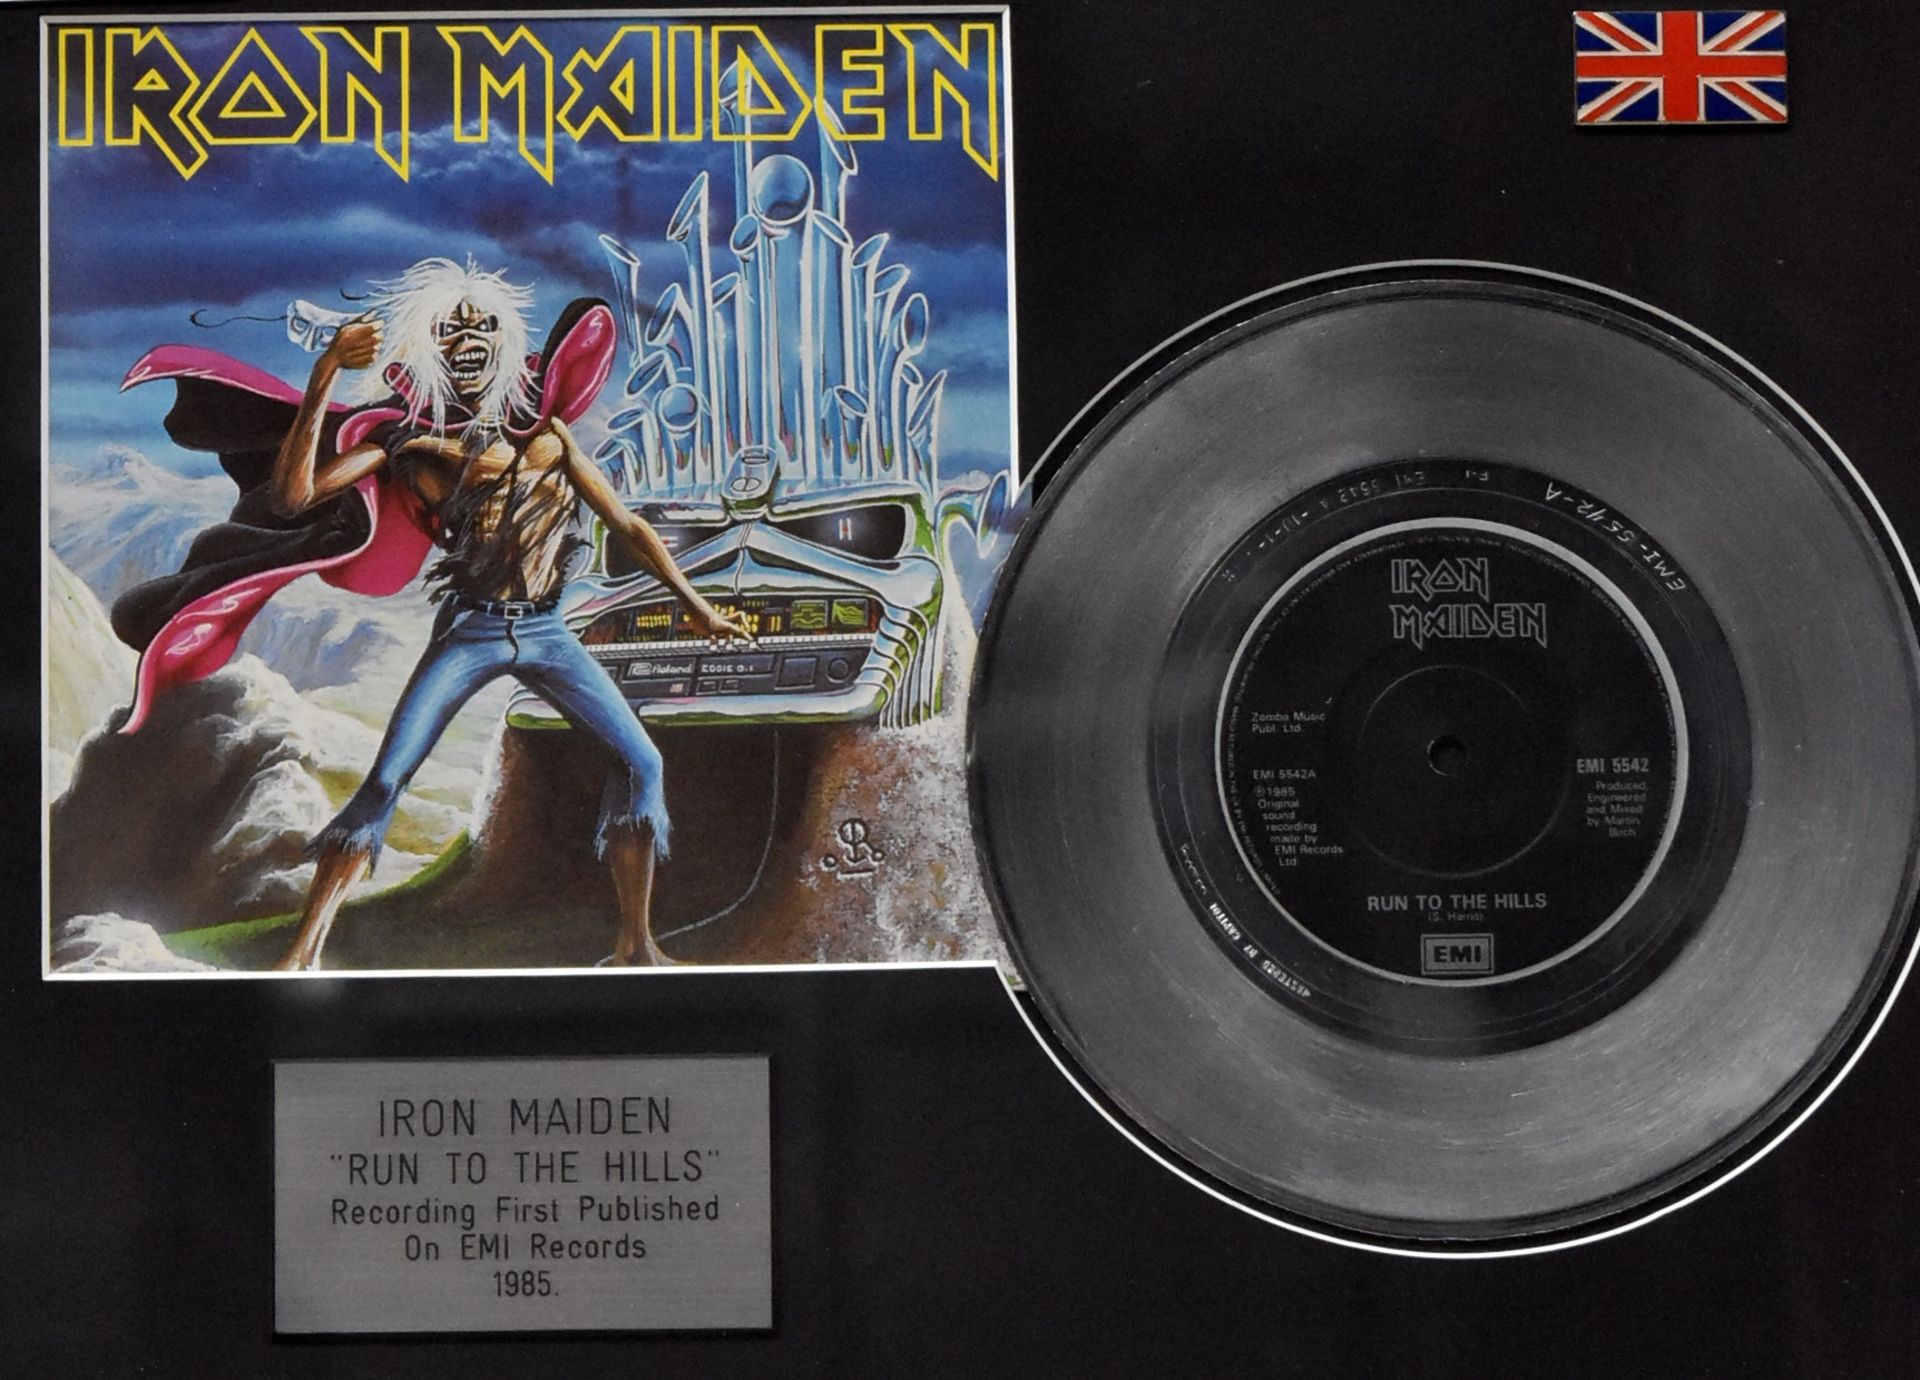 1 x IRON MAIDEN - Run To The Hills On Emi Records Framed 7 Inch Vinyl - Image 4 of 5